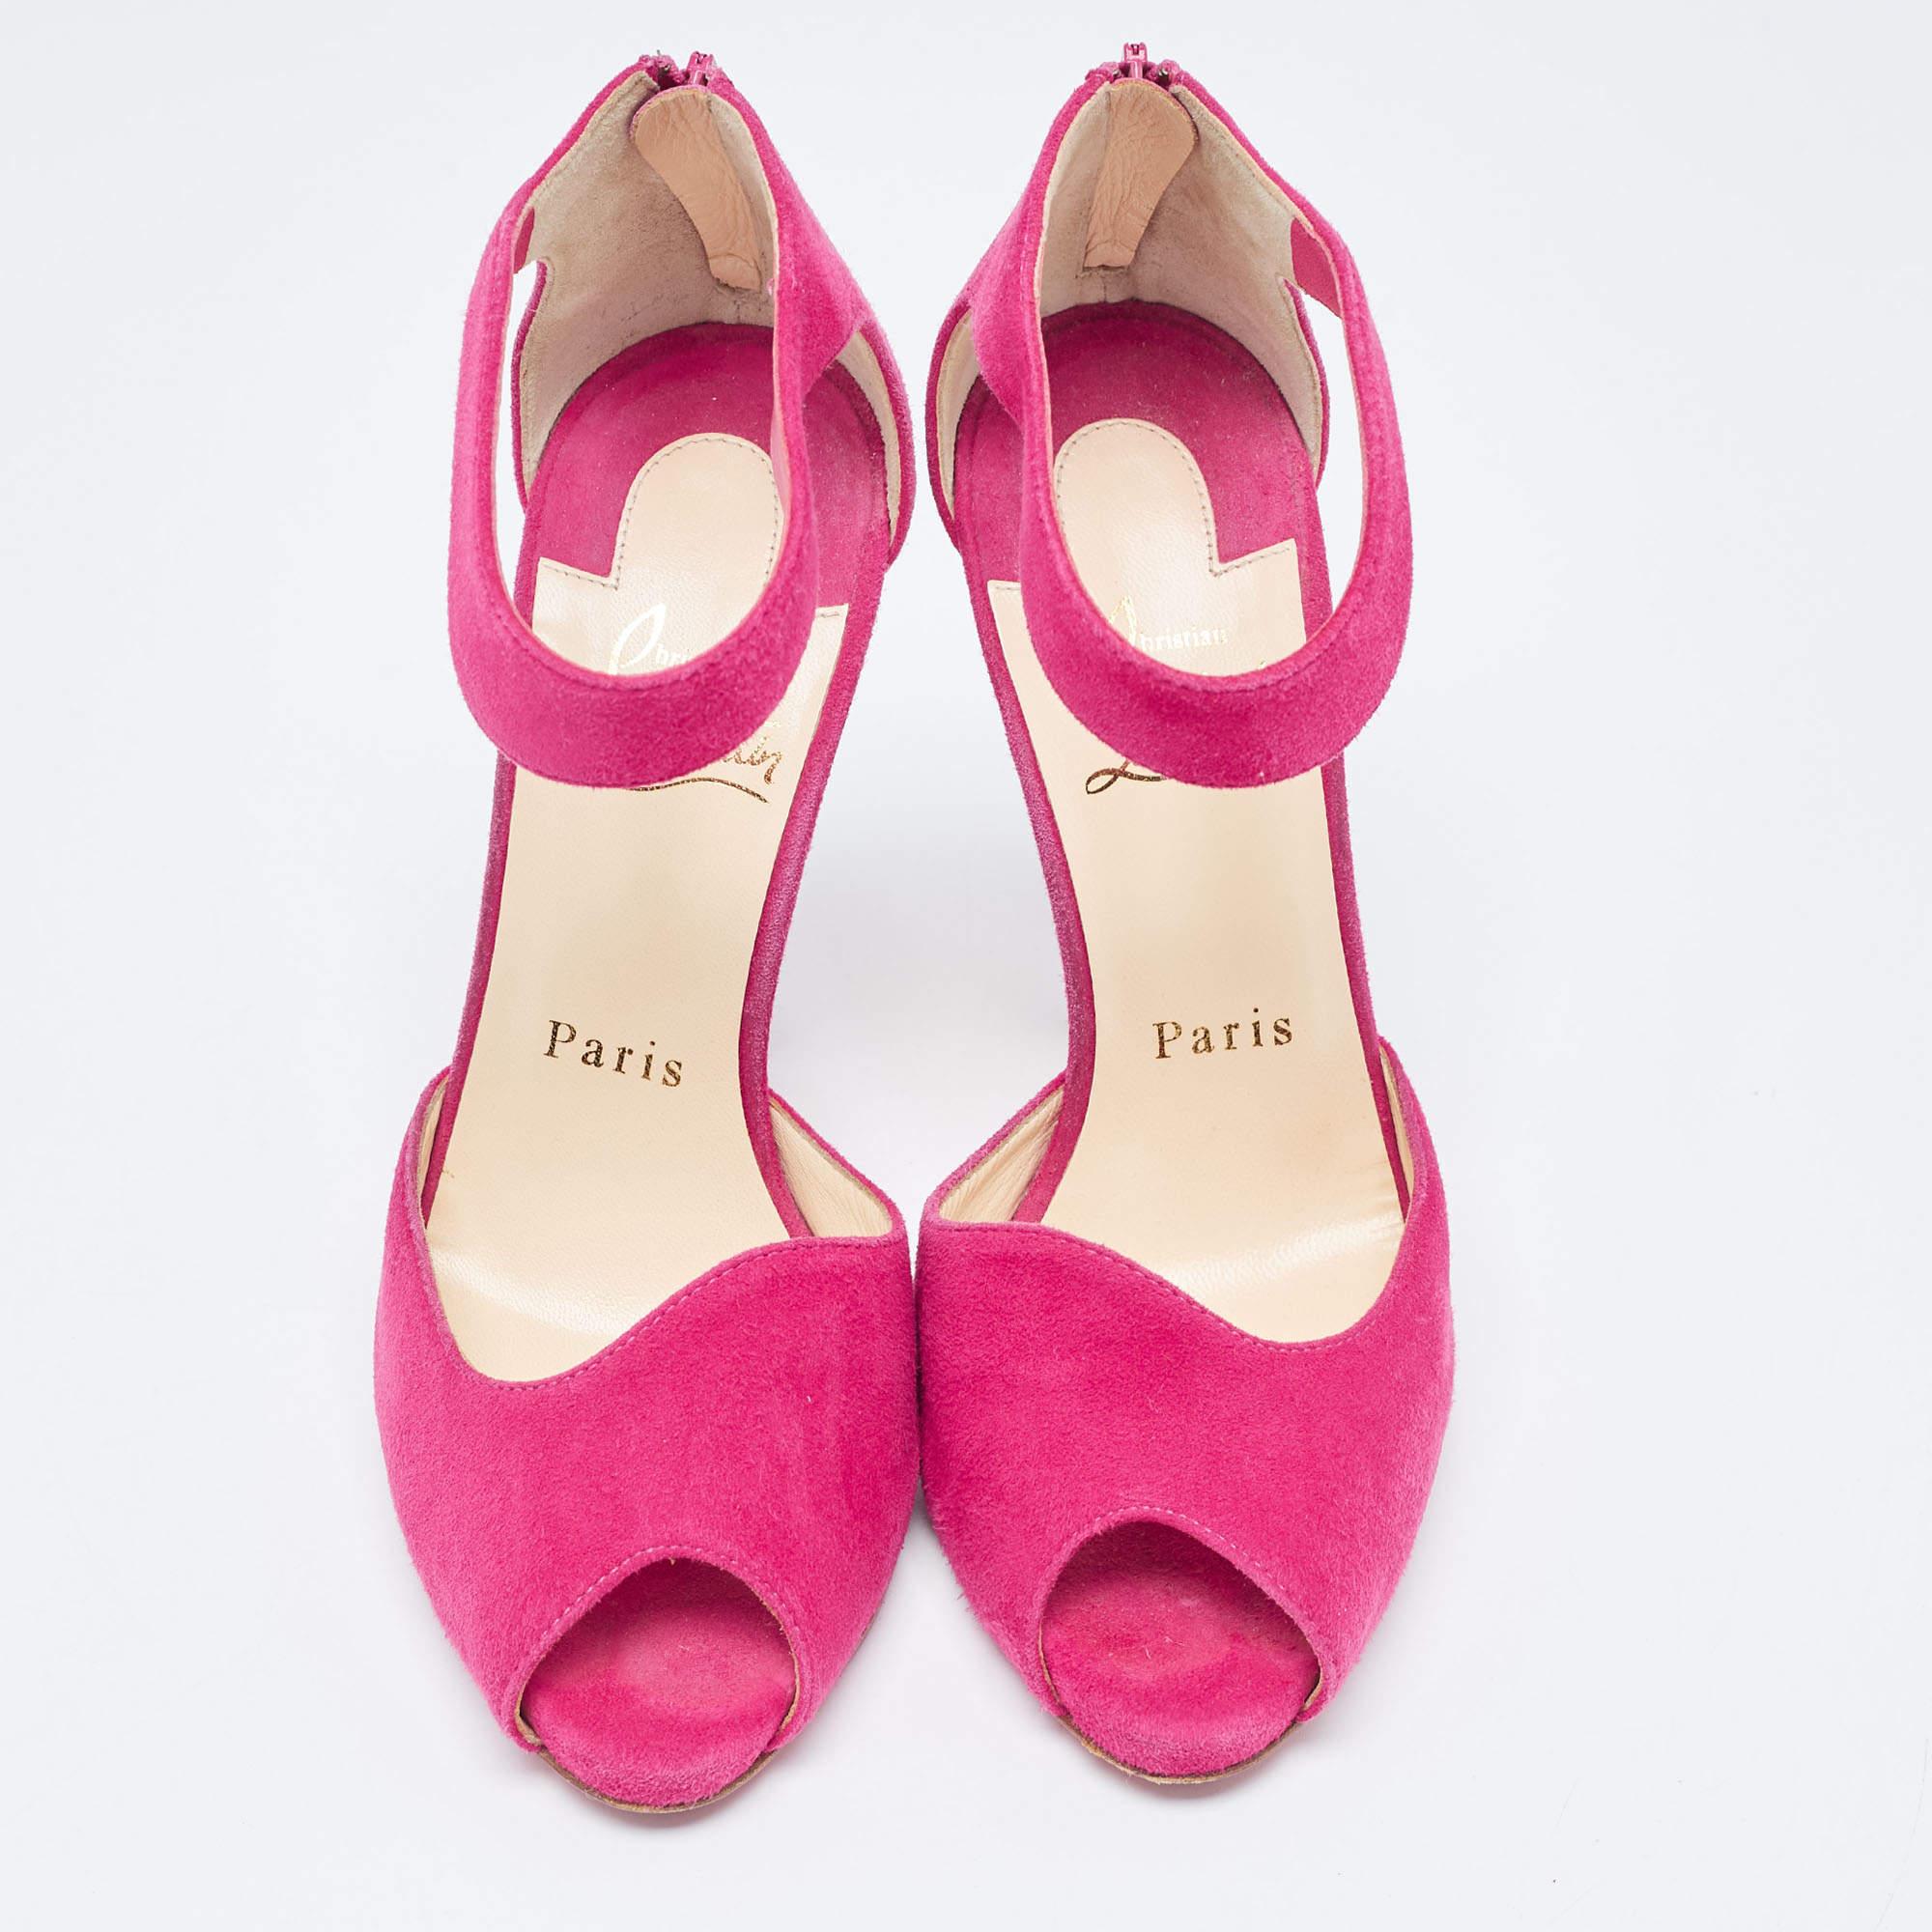 Christian Louboutin Pink Suede Ankle Strap Sandals Size 36 In Good Condition For Sale In Dubai, Al Qouz 2